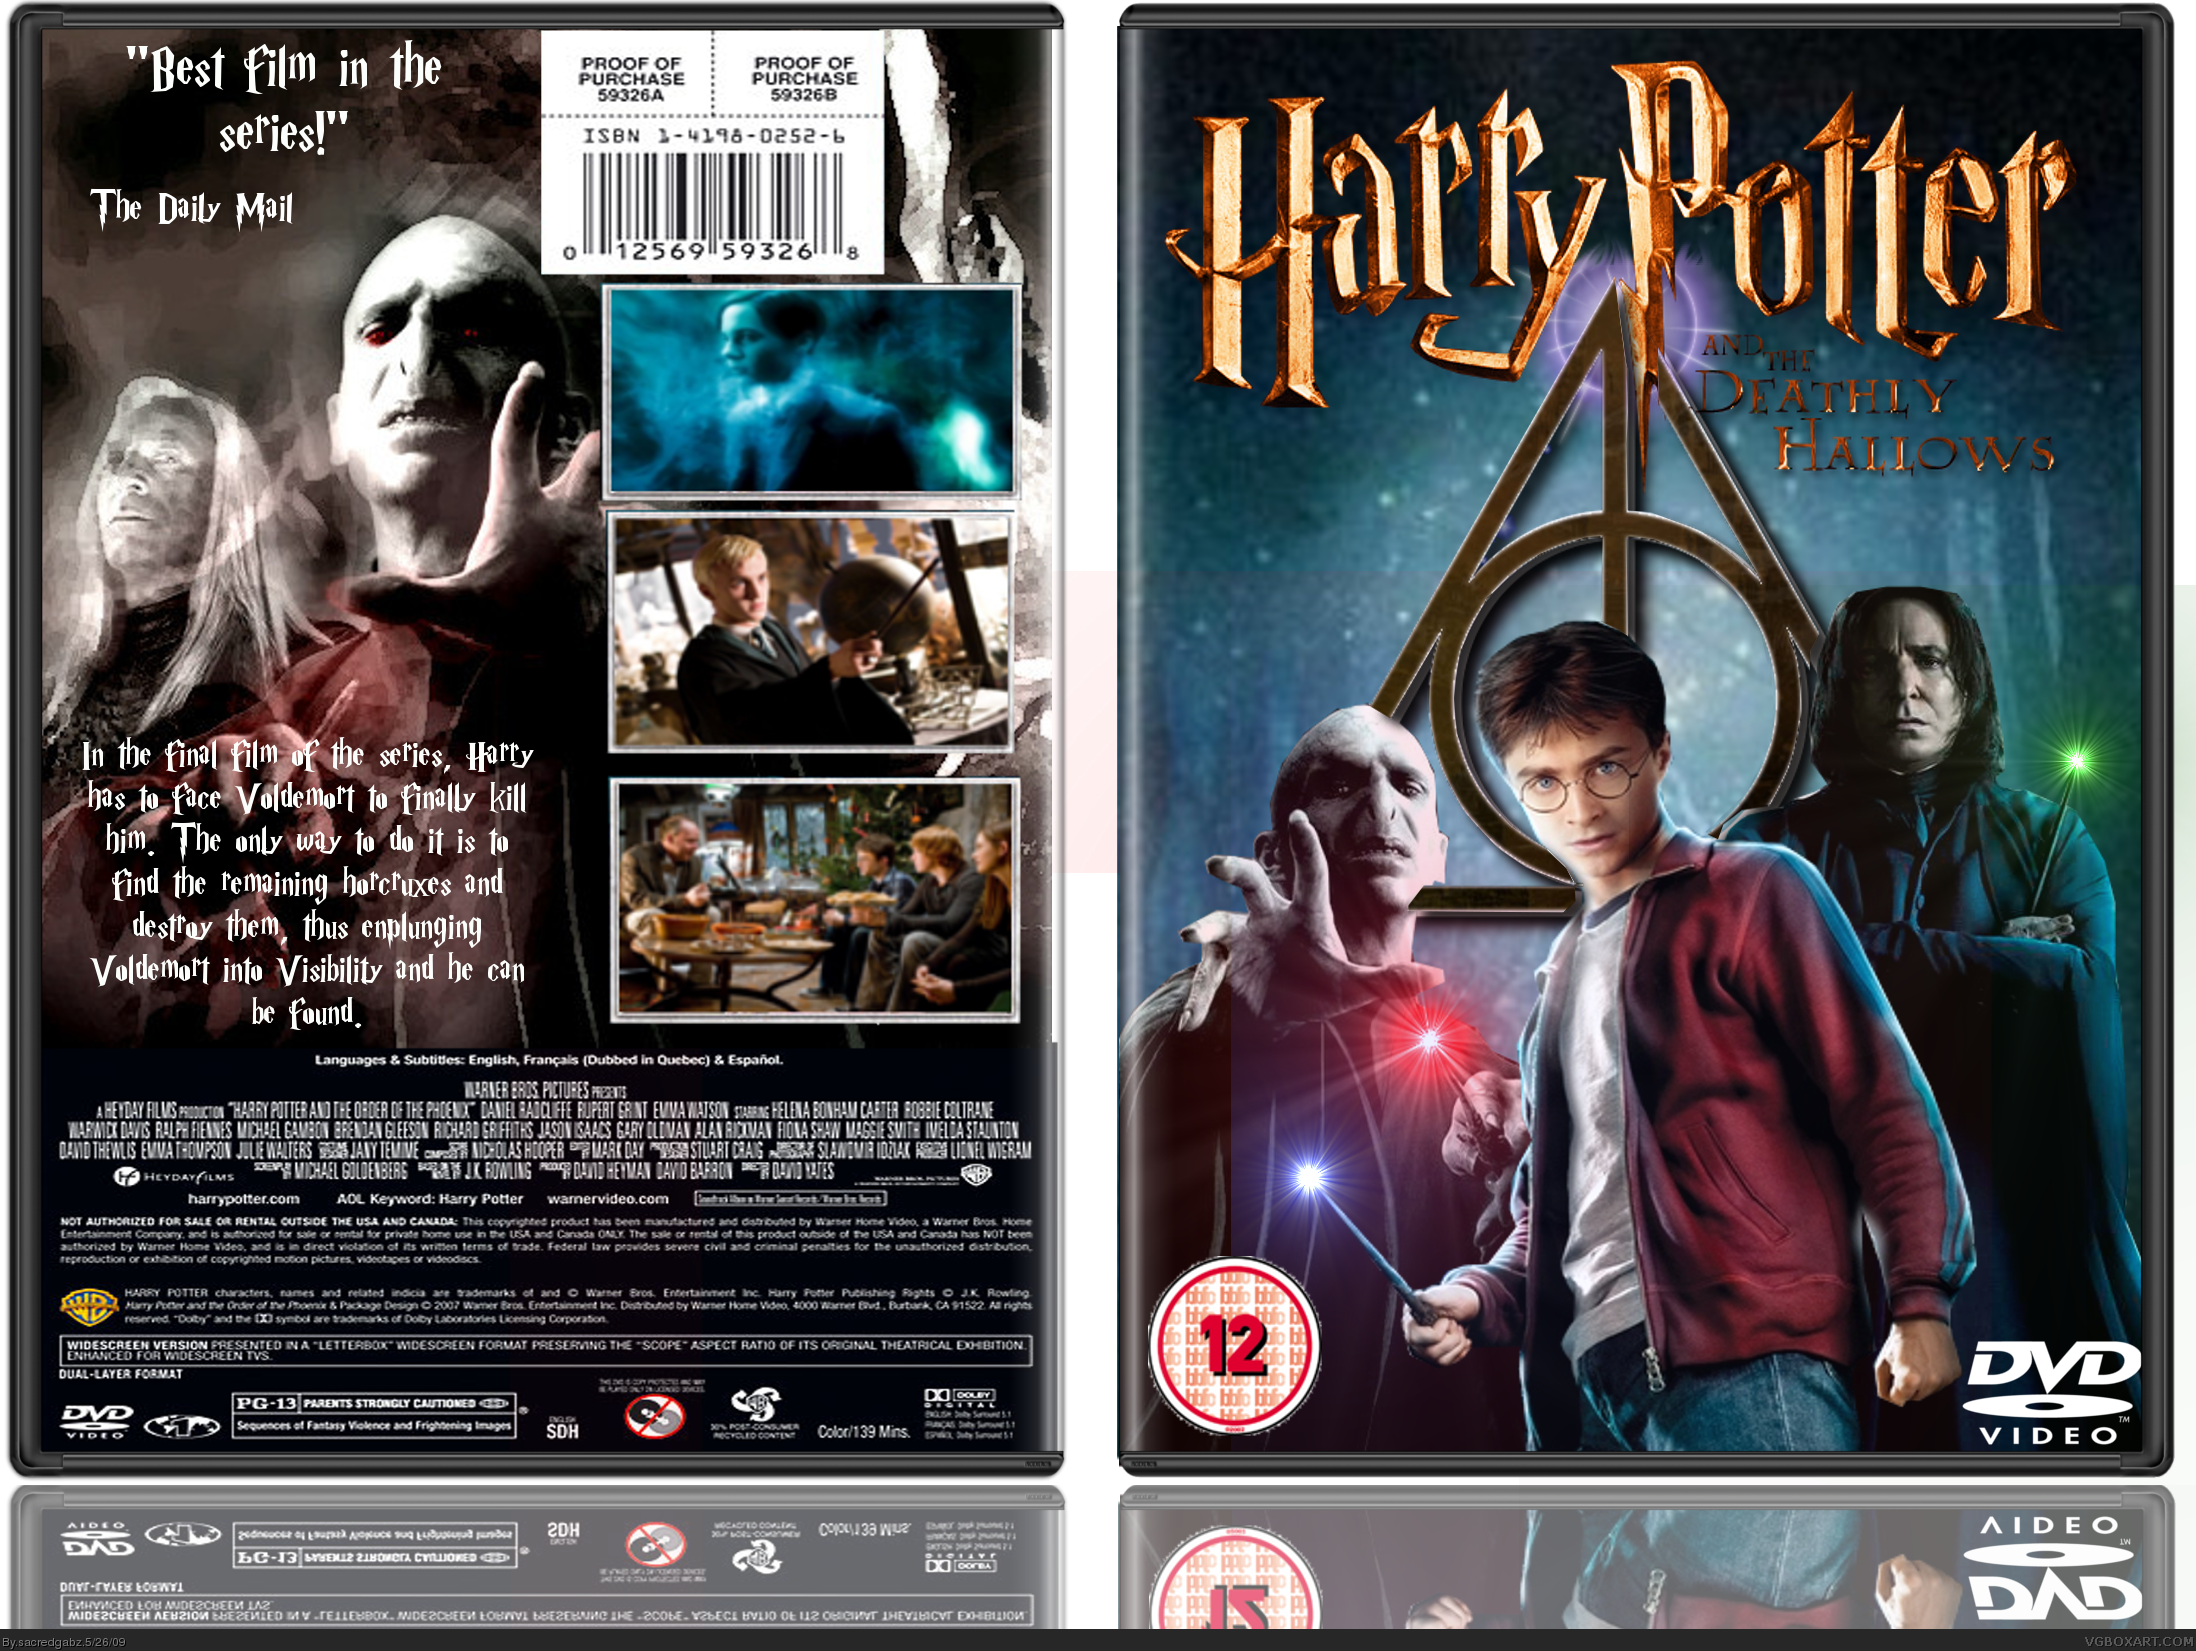 Harry Potter and the Deathly Hallows box cover